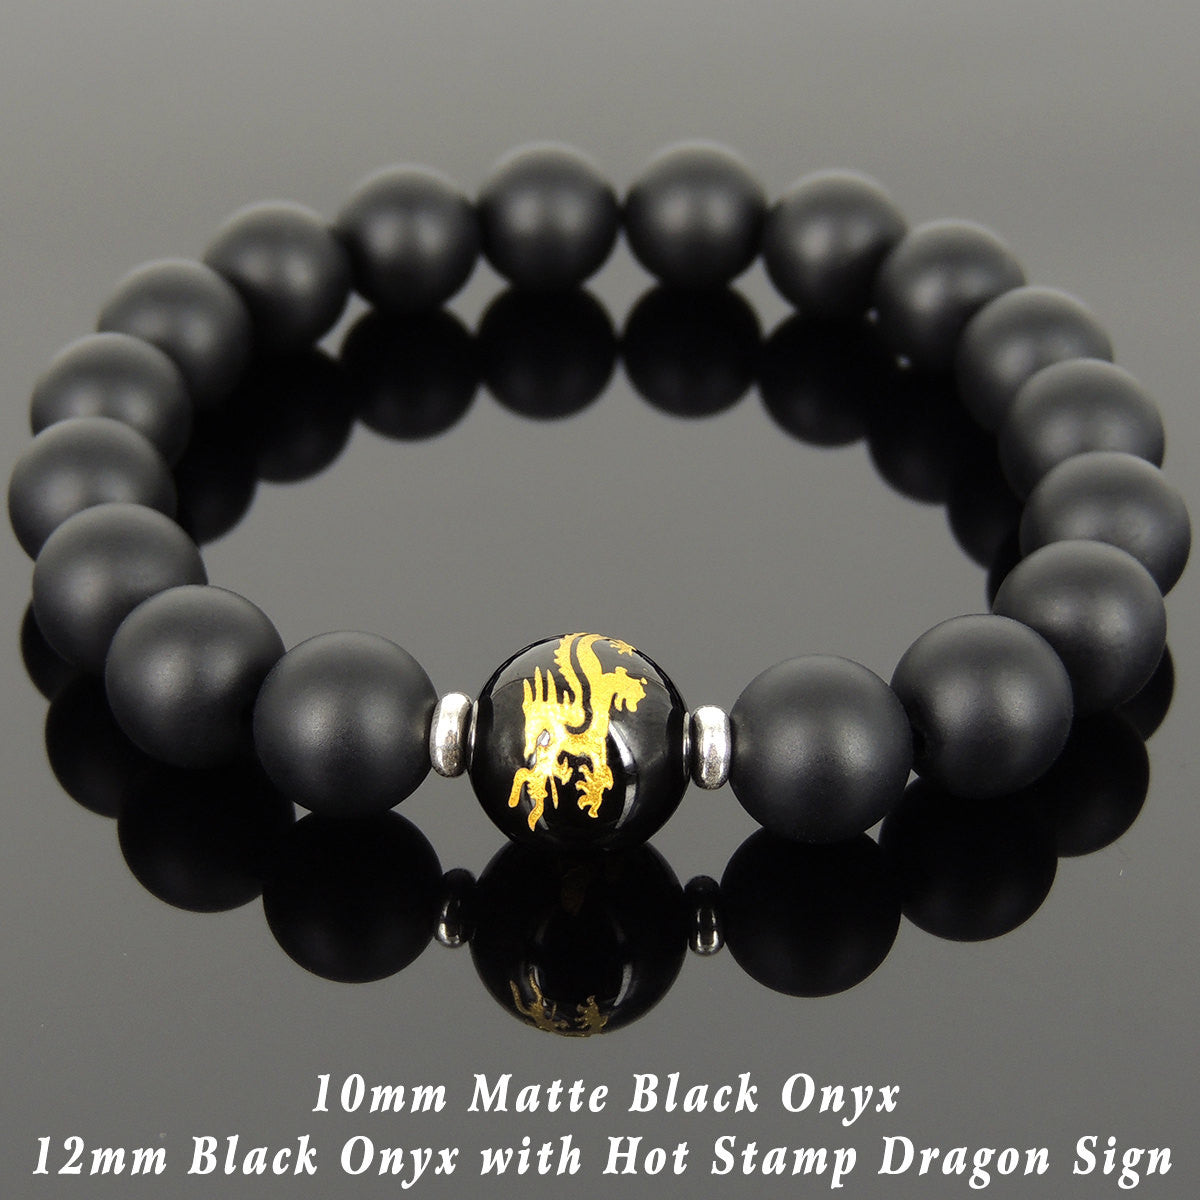 Black Onyx Healing Gemstone Bracelet with Gold Hot Stamped Dragon & Cloud & S925 Sterling Silver Spacers - Handmade by Gem & Silver BR1027